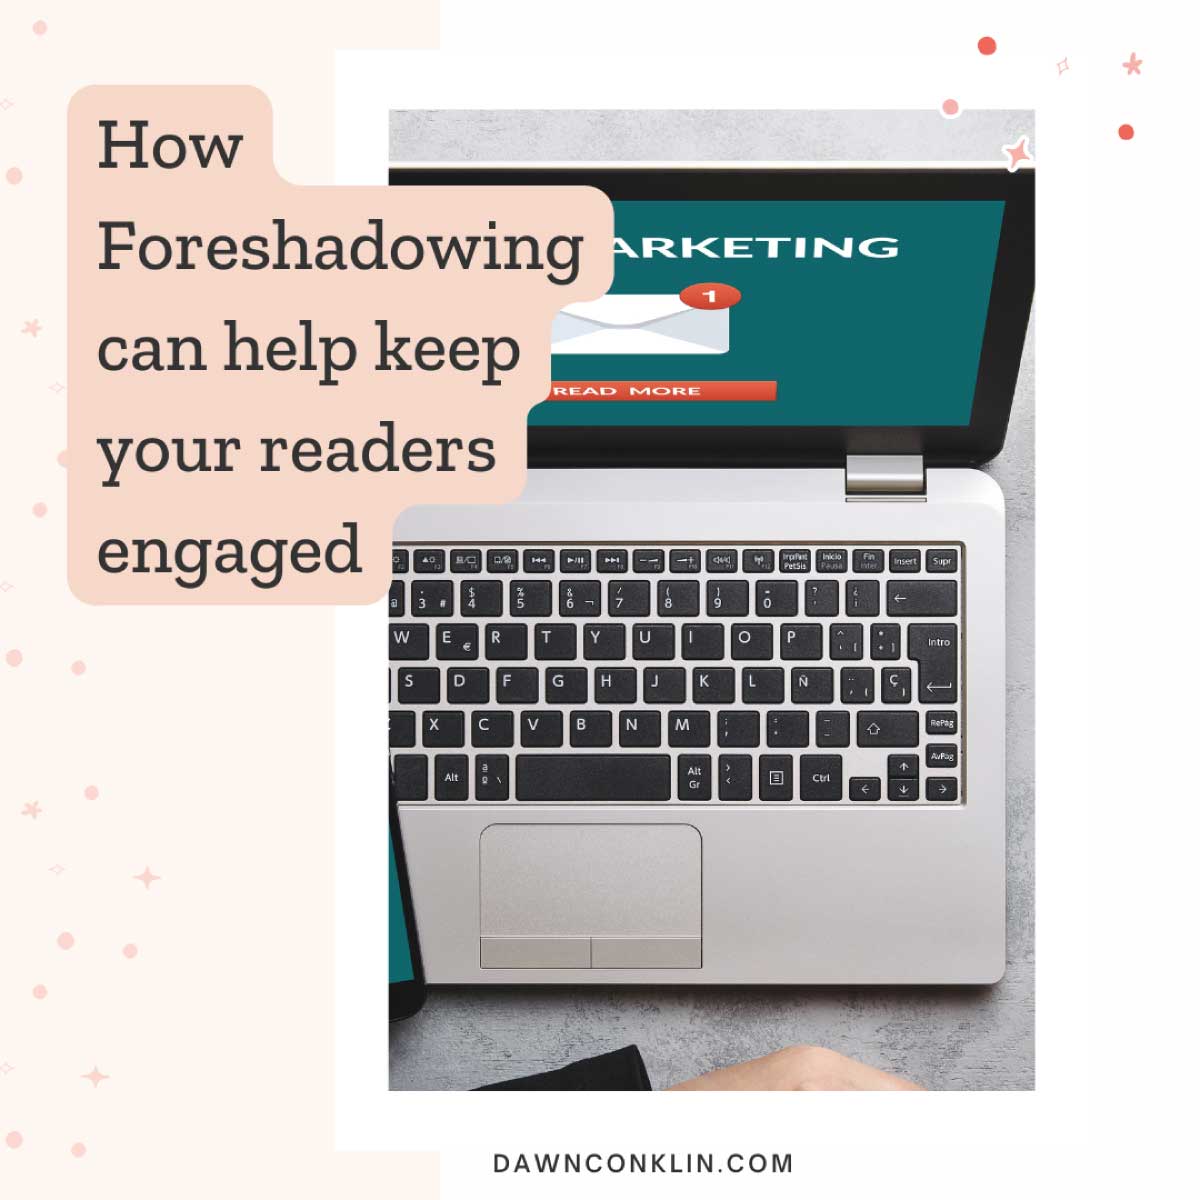 Email Marketing – Foreshadowing Creates Anticipation